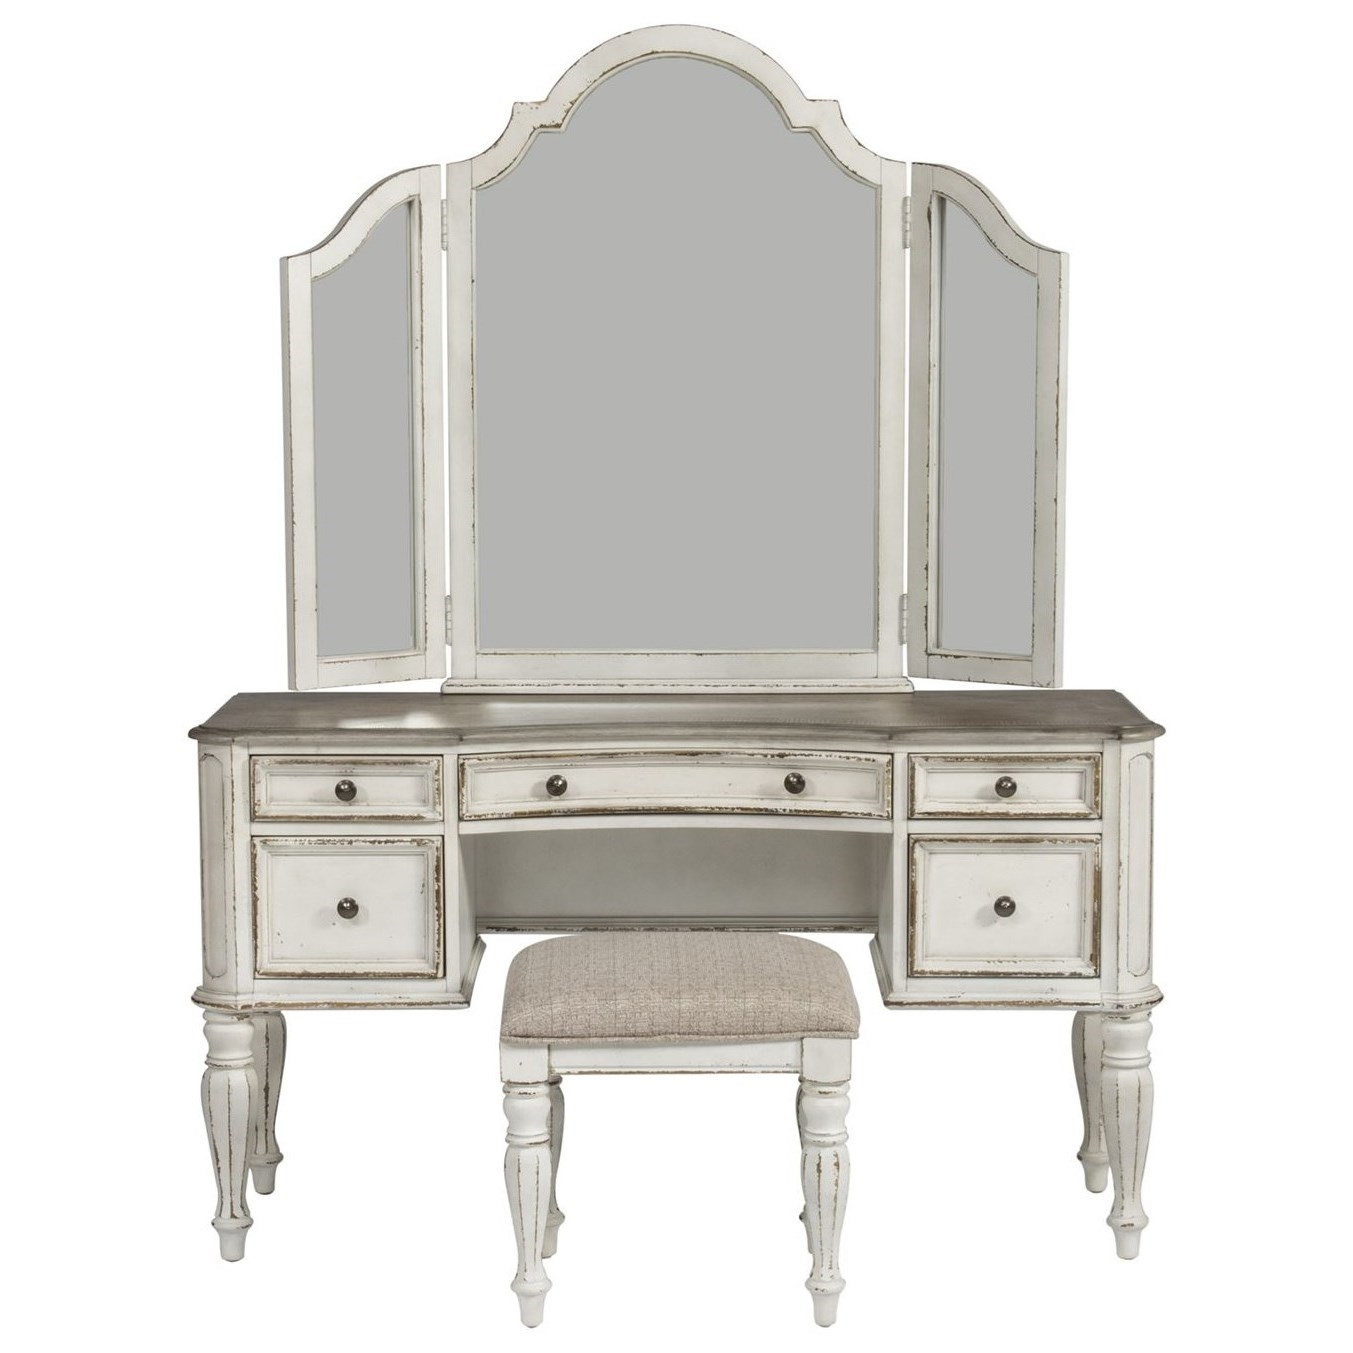 Magnolia Manor Bedroom Vanity Set Liberty Furniture At Furniture And Appliancemart throughout proportions 1500 X 1500